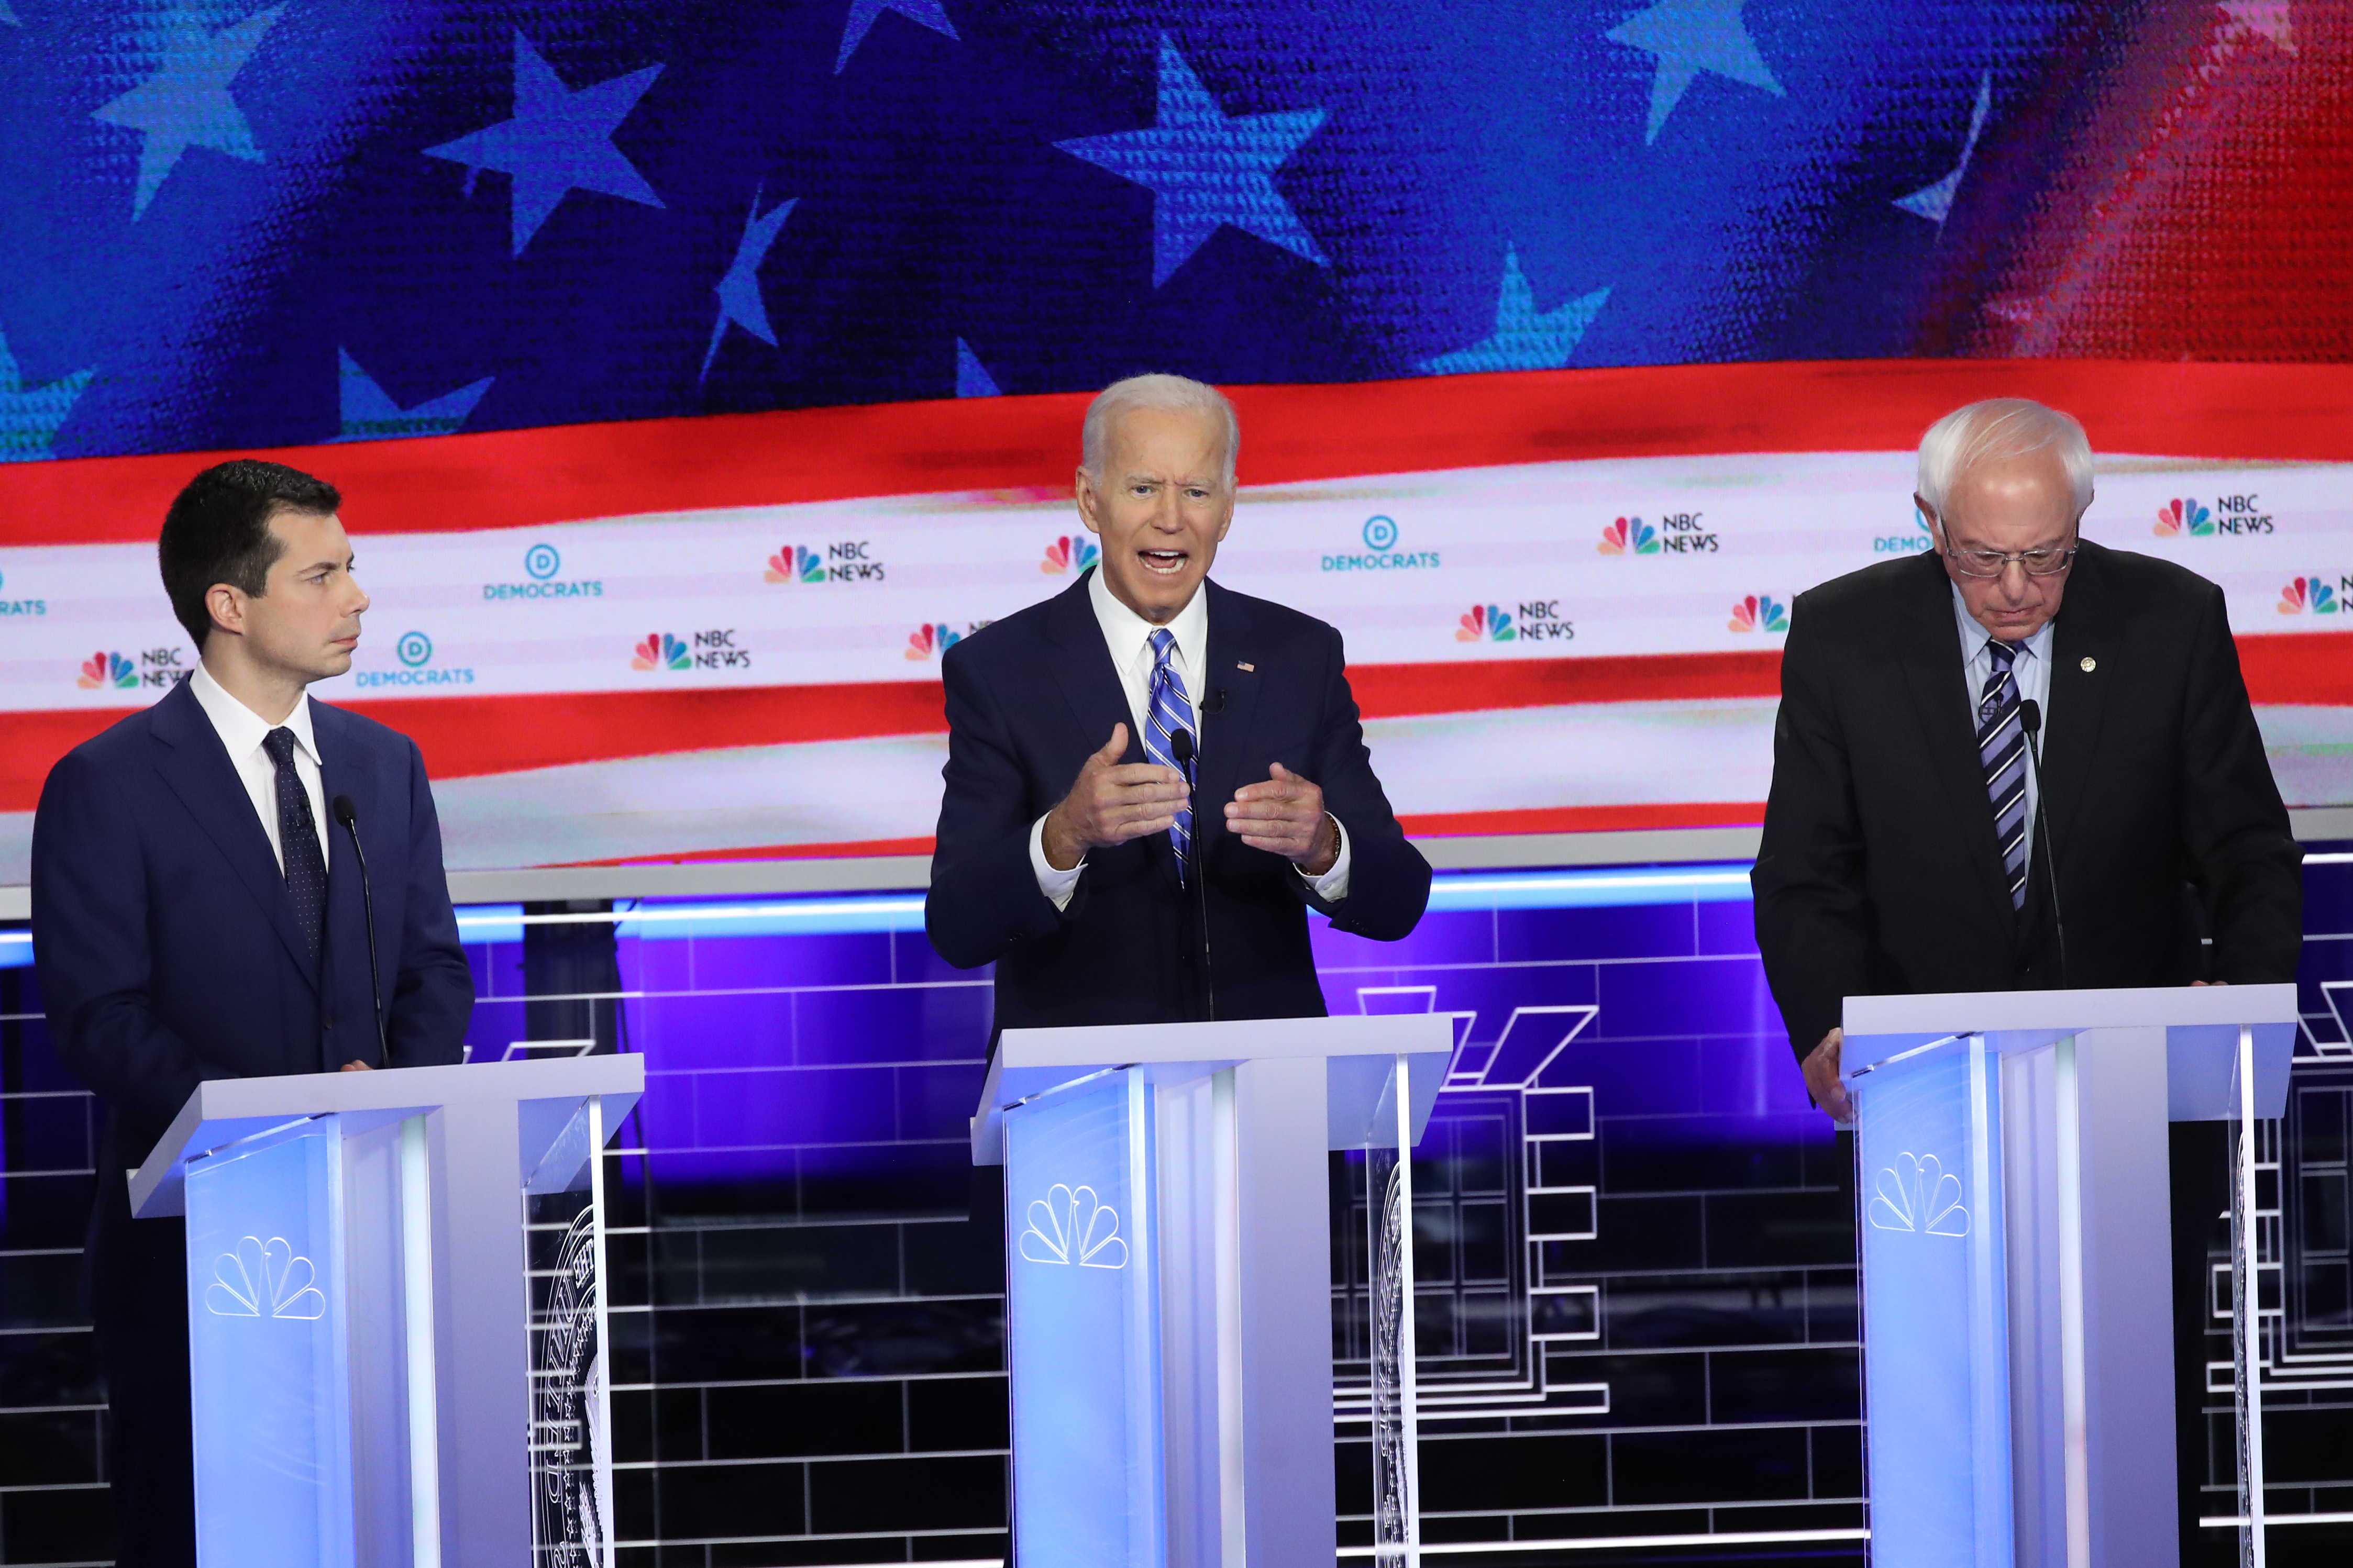 MIAMI, FLORIDA - JUNE 27: Democratic presidential candidates (L-R) South Bend, Indiana Mayor Pete Buttigieg, former Vice President Joe Biden and Sen. Bernie Sanders (I-VT) take part in the second night of the first Democratic presidential debate on June 27, 2019 in Miami, Florida. (Photo by Drew Angerer/Getty Images)